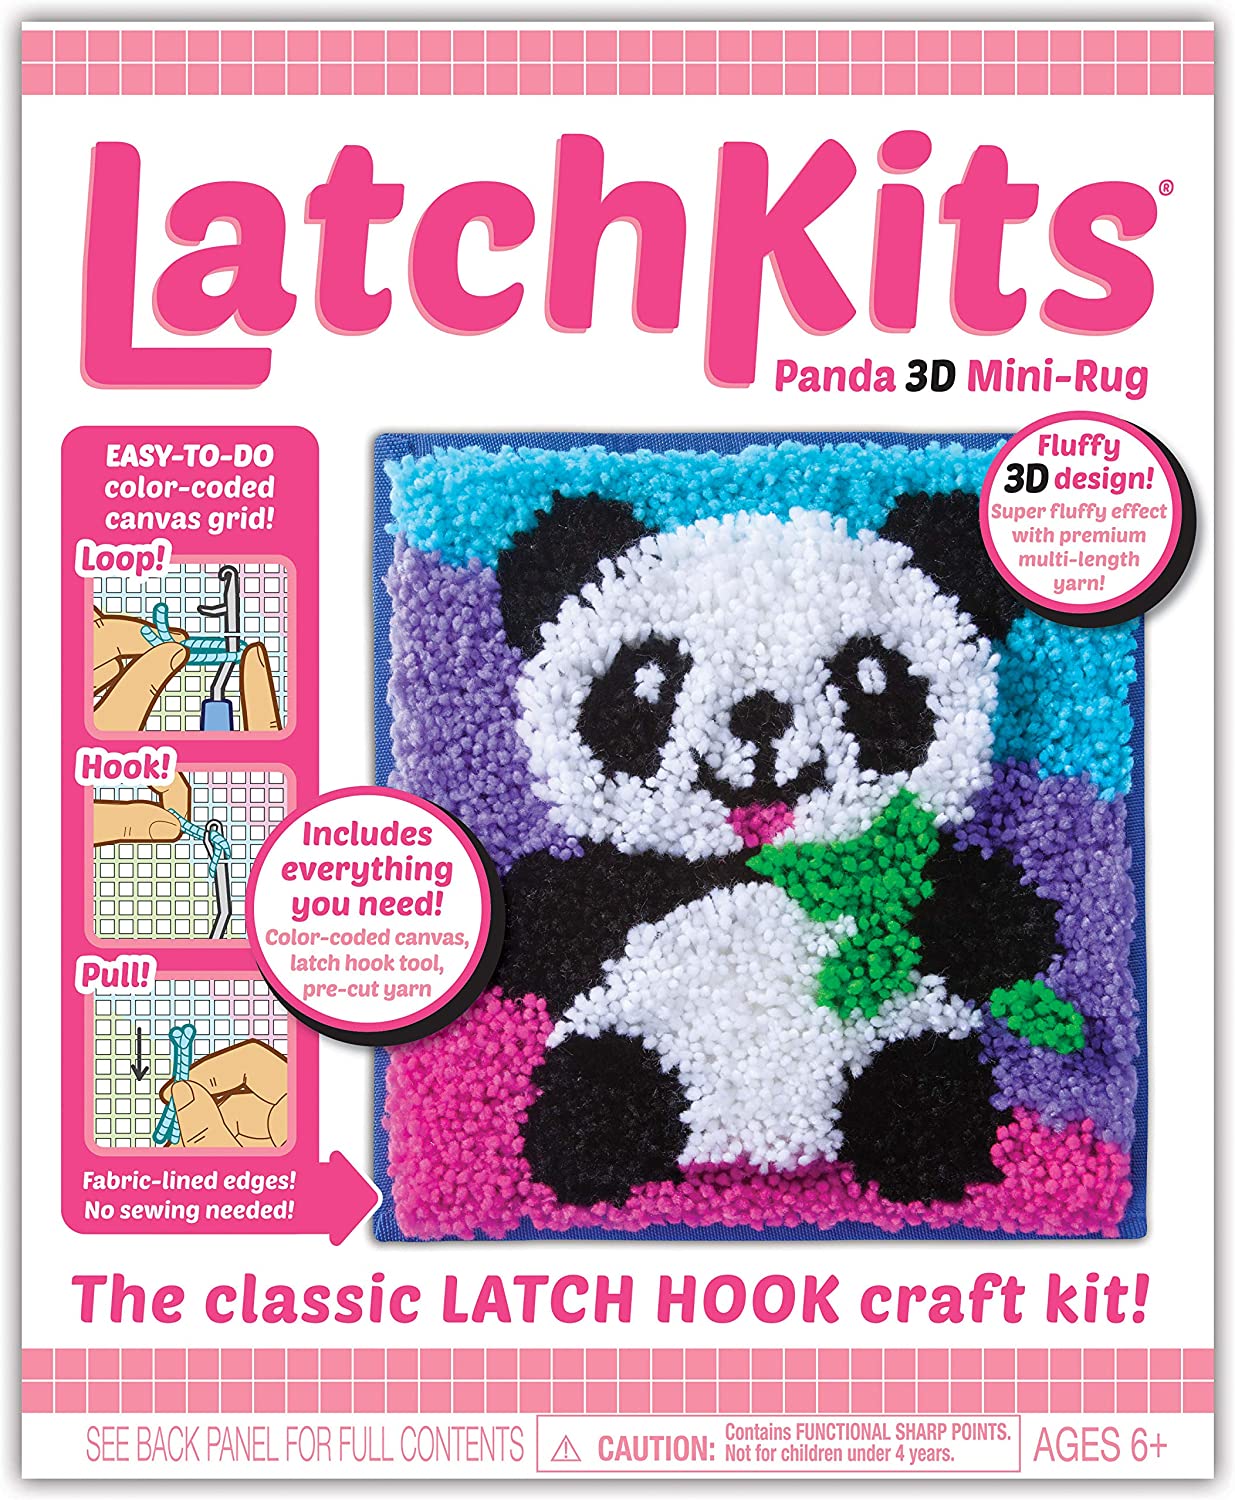 LatchKits Latch Hook Kit for Wall Hangings & Mini-Rugs - Dragon - Craft Kit  with Easy, Color-Coded Canvas, Pre-Cut Yarn & Latch Hook Tool - Perfect